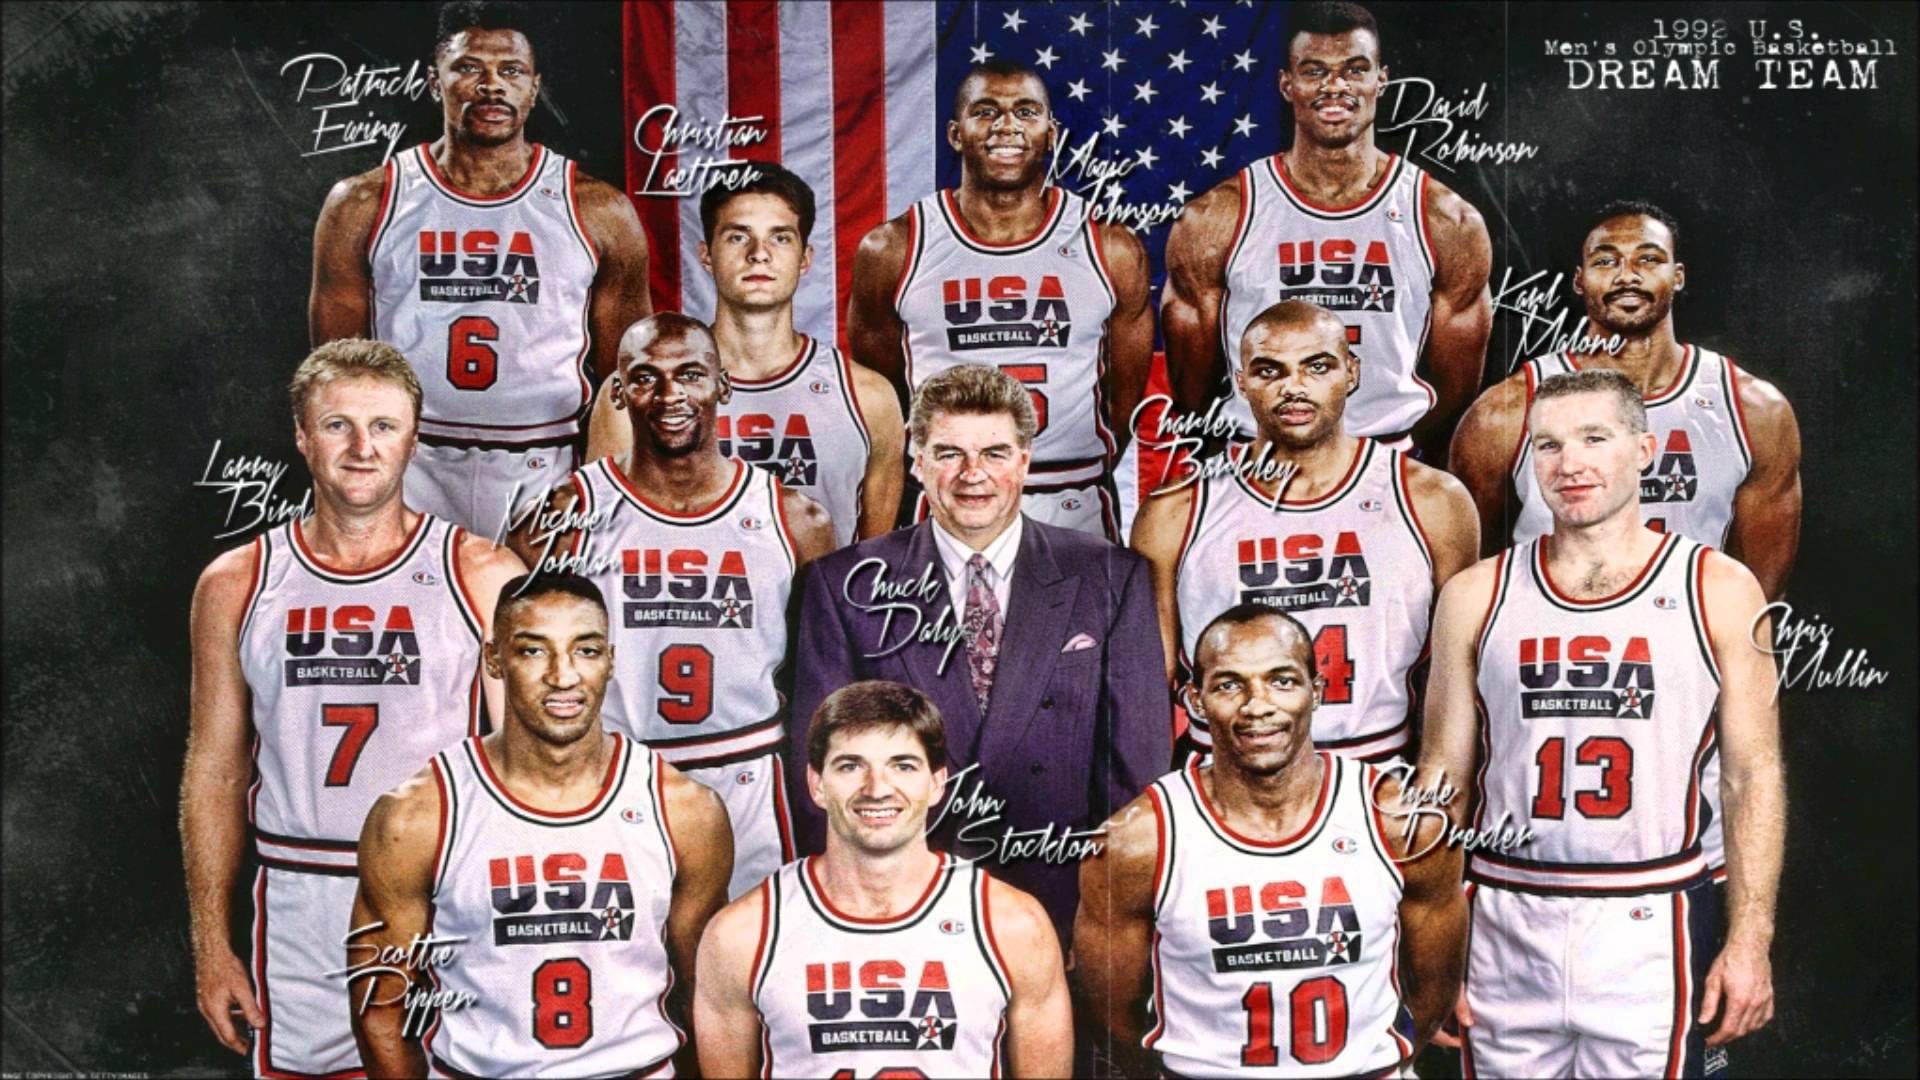 Dream Team would smash the 2012 USA Olympic Men's Basketball